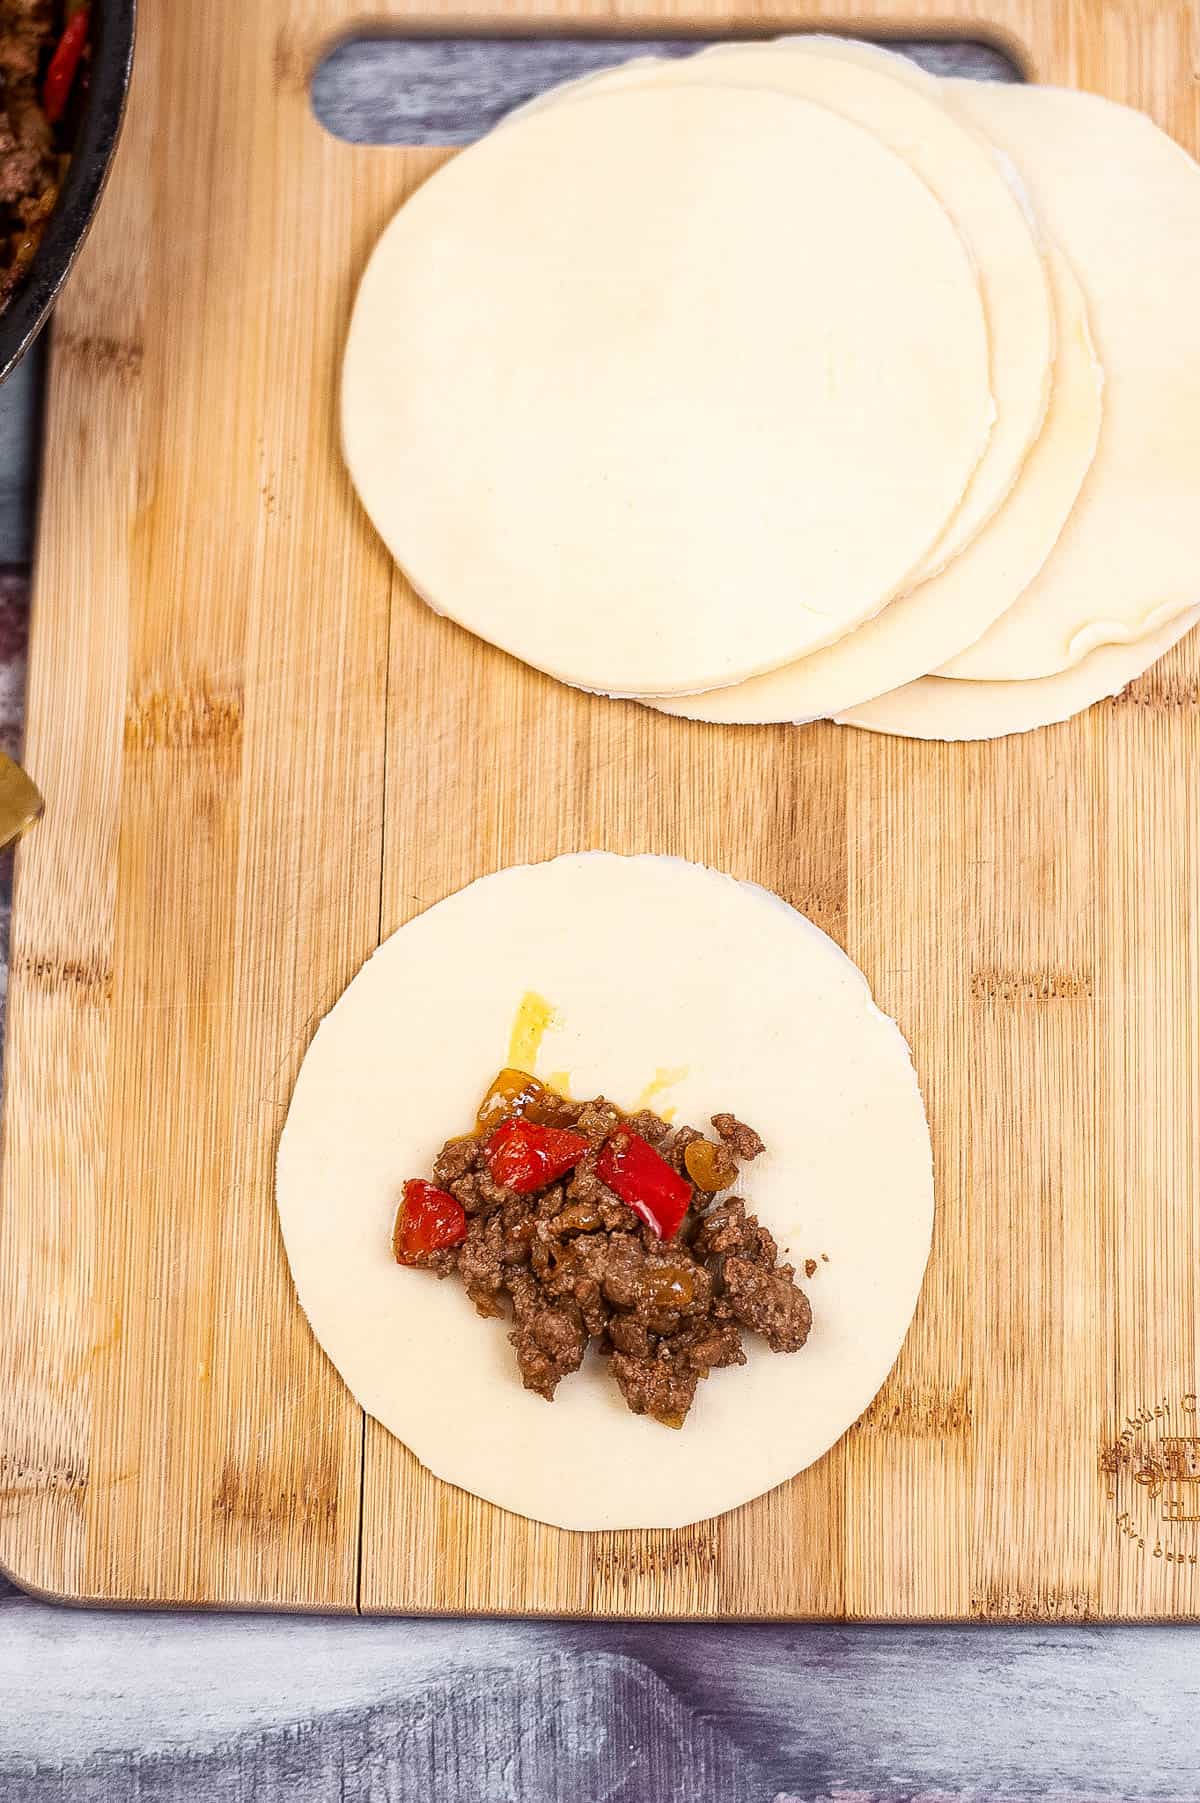 Air fryer tortillas with meat and peppers on a wooden cutting board.